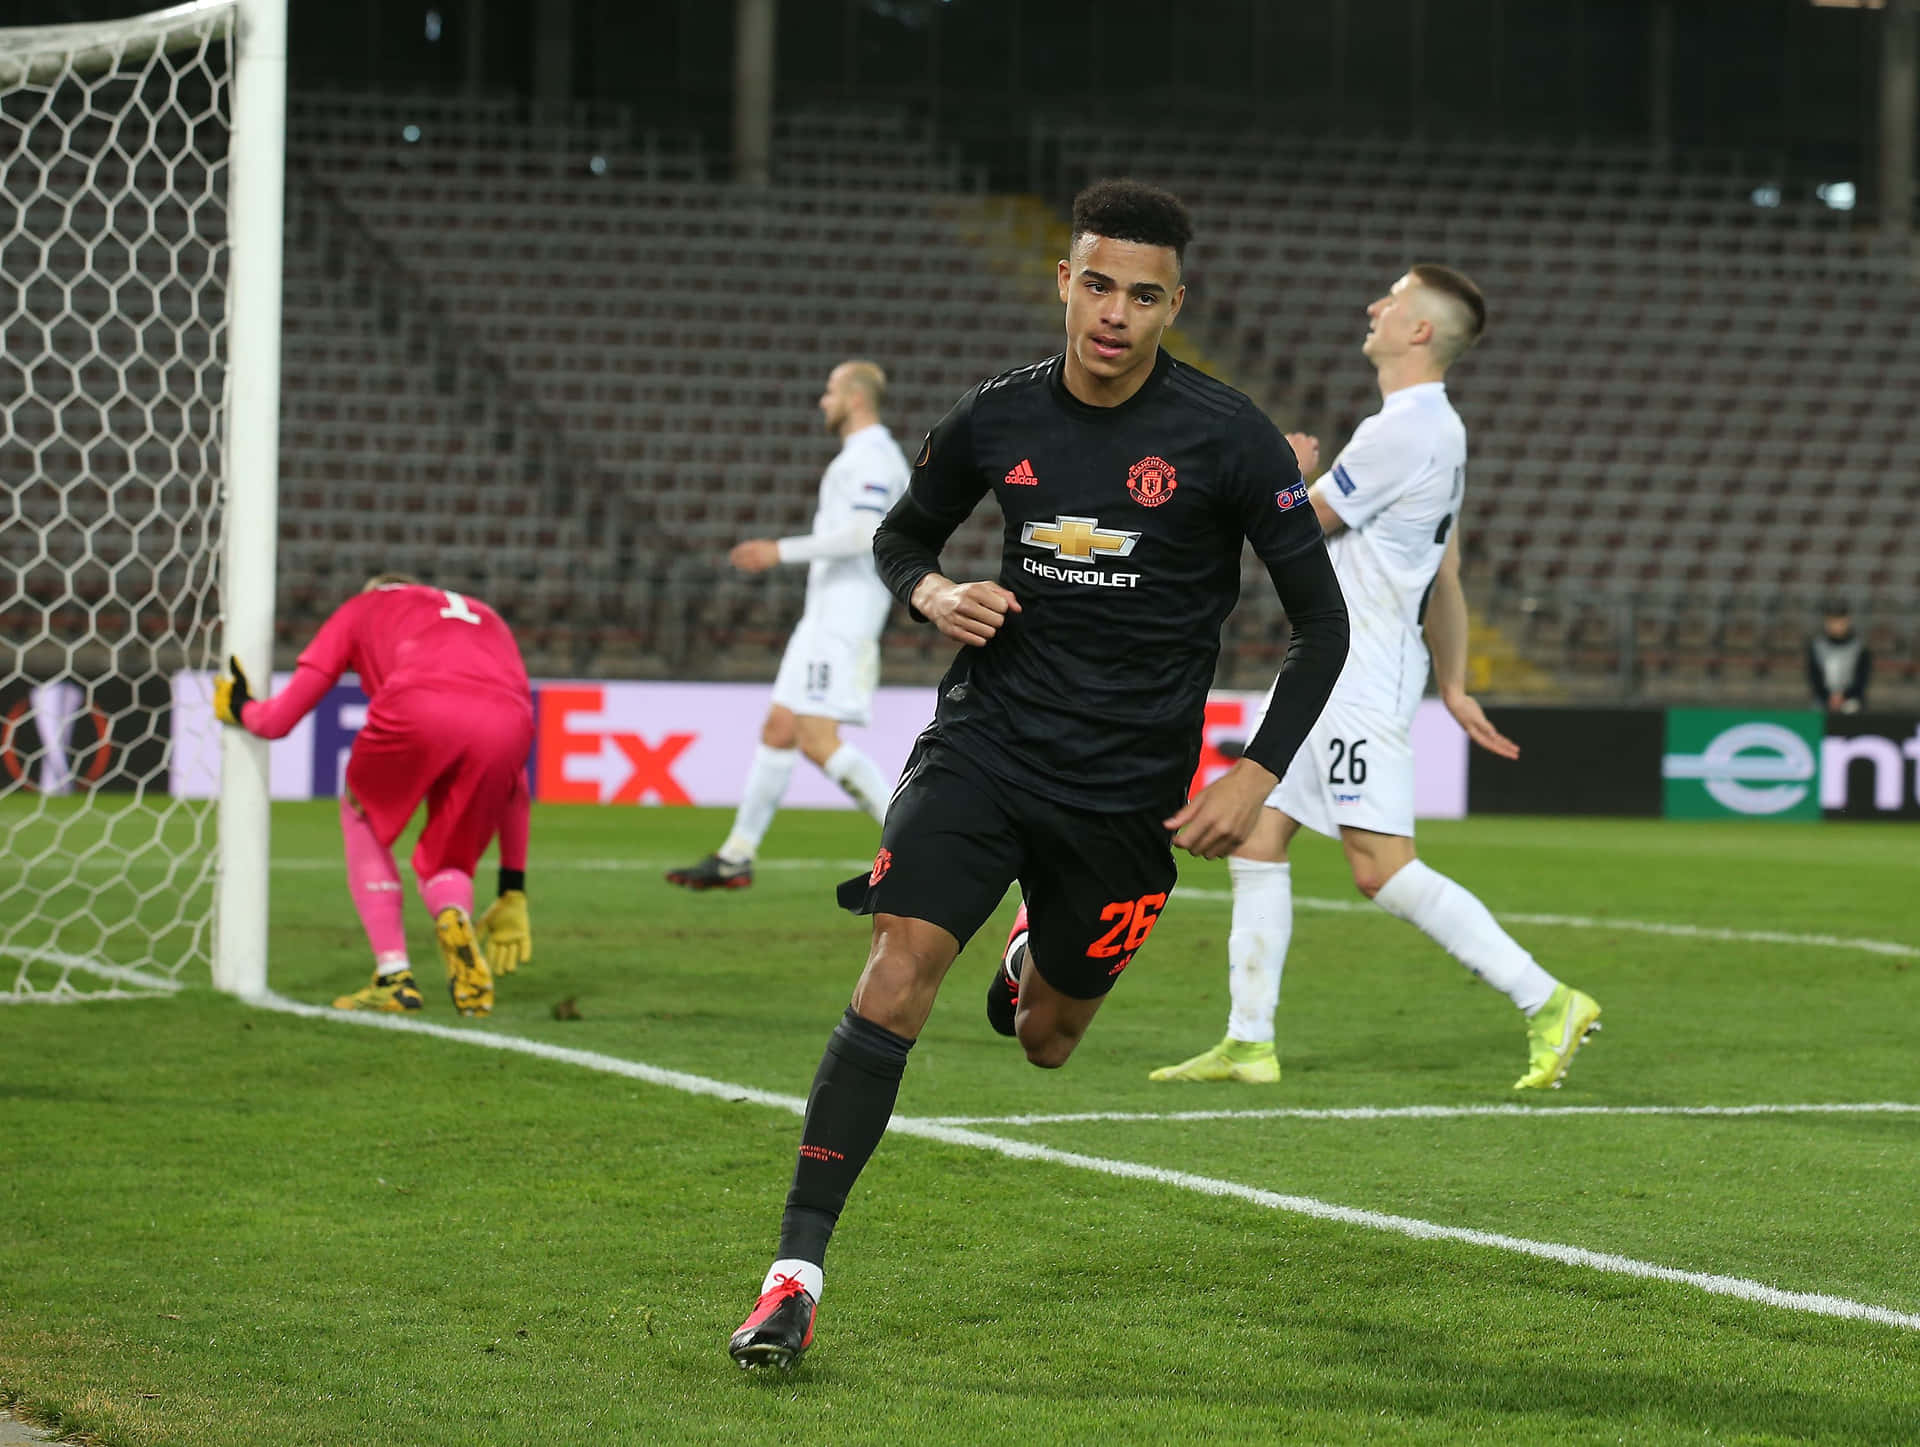 Mason Greenwood unleashes a powerful shot during a match